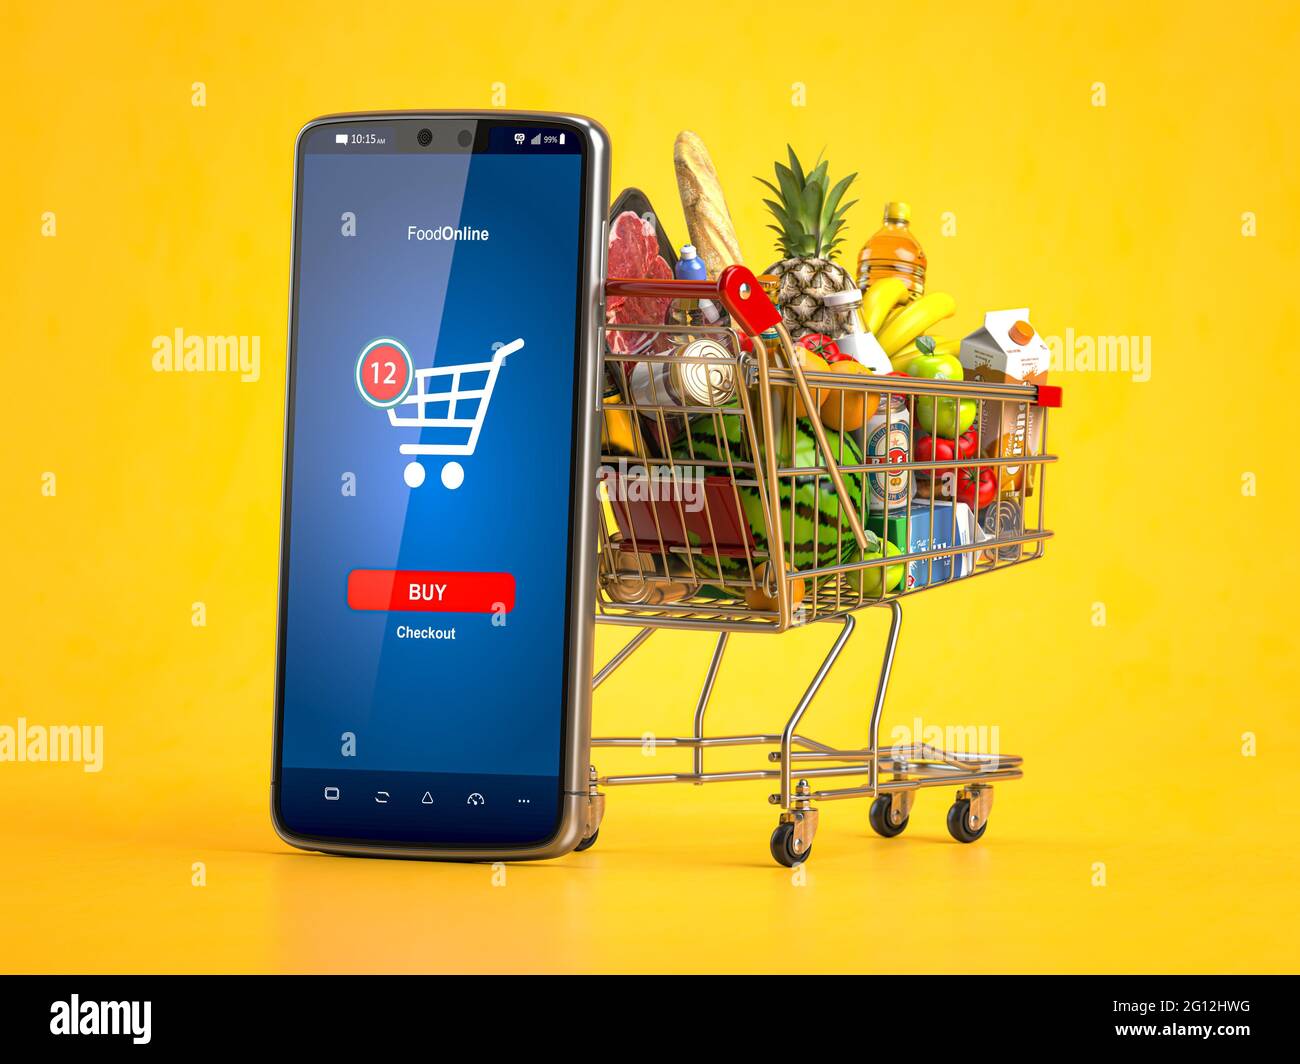 Shopping cart full of food and smartphone. Grocery market shop, food and eats online ordering, buying and delivery concept. 3d illustration. Stock Photo